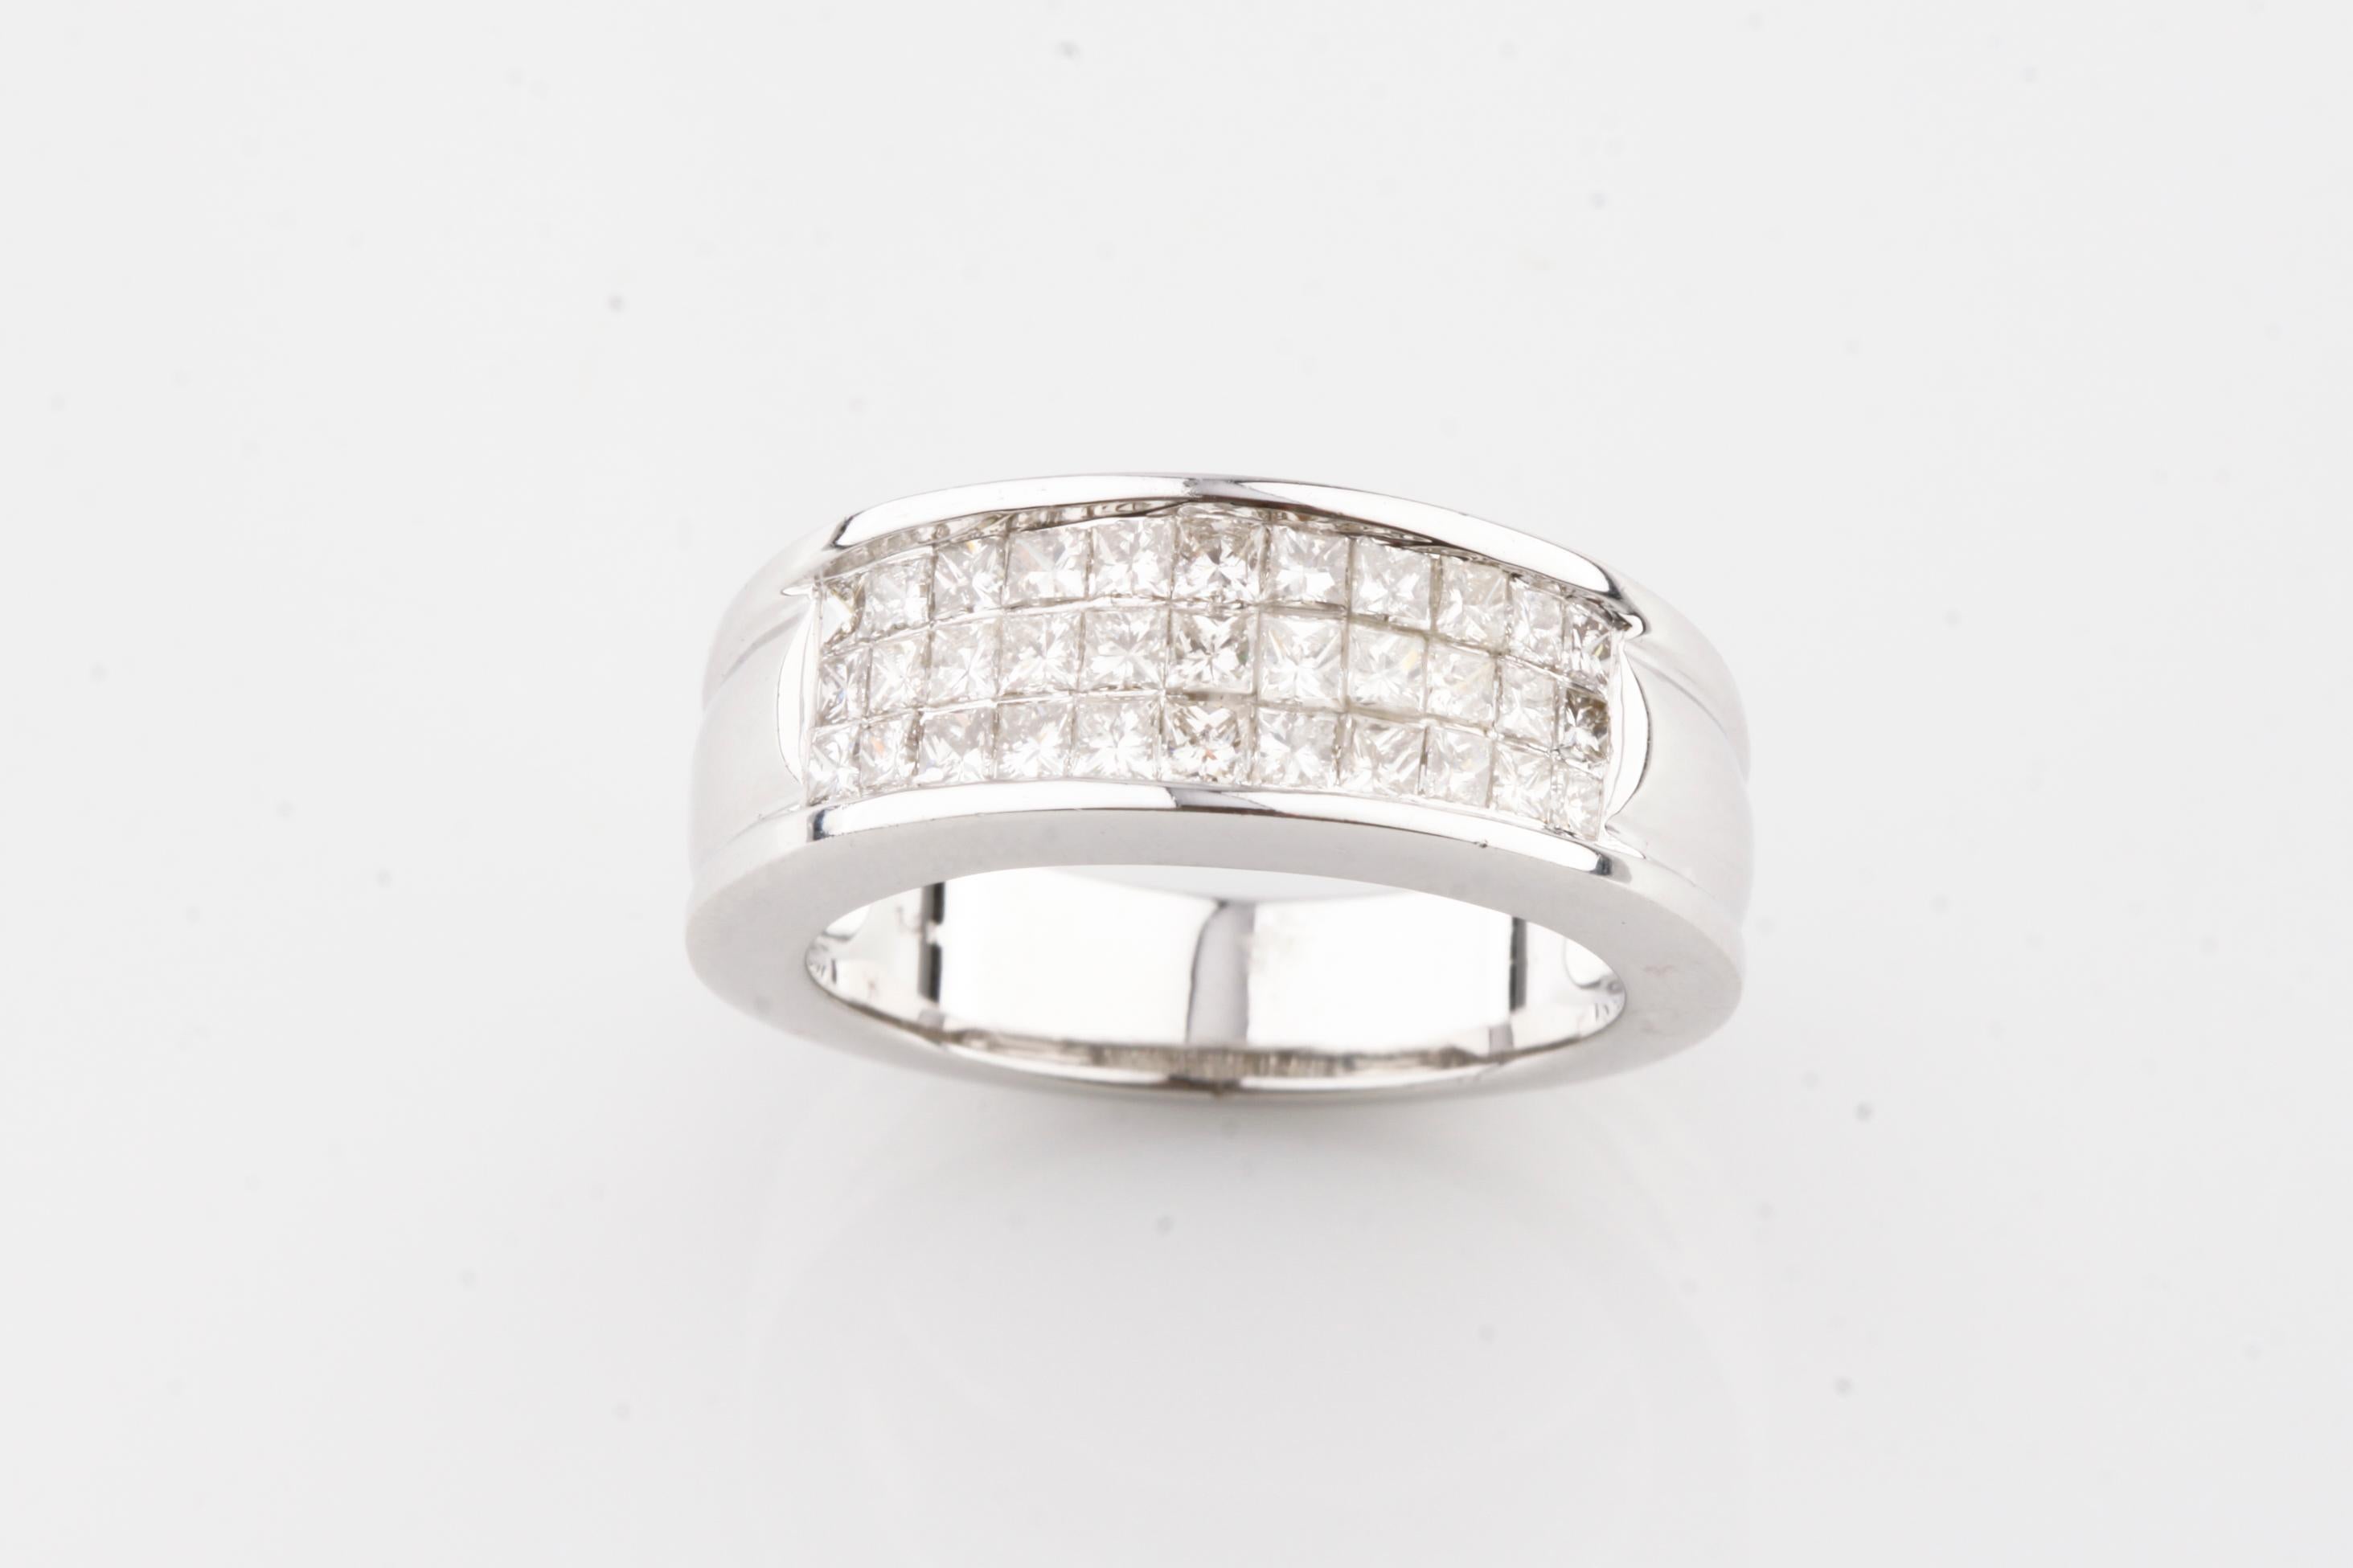 Gorgeous 14k White Gold Band Ring
Features Plaque of Invisible Set Princess Cut Stones
Total Diamond Weight = 1.0 ct
Width of Ring at Front = 8 mm
Width of Band at Reverse = 3 mm
Total Mass = 8.5 grams
Size 6.75
Gorgeous Ring!